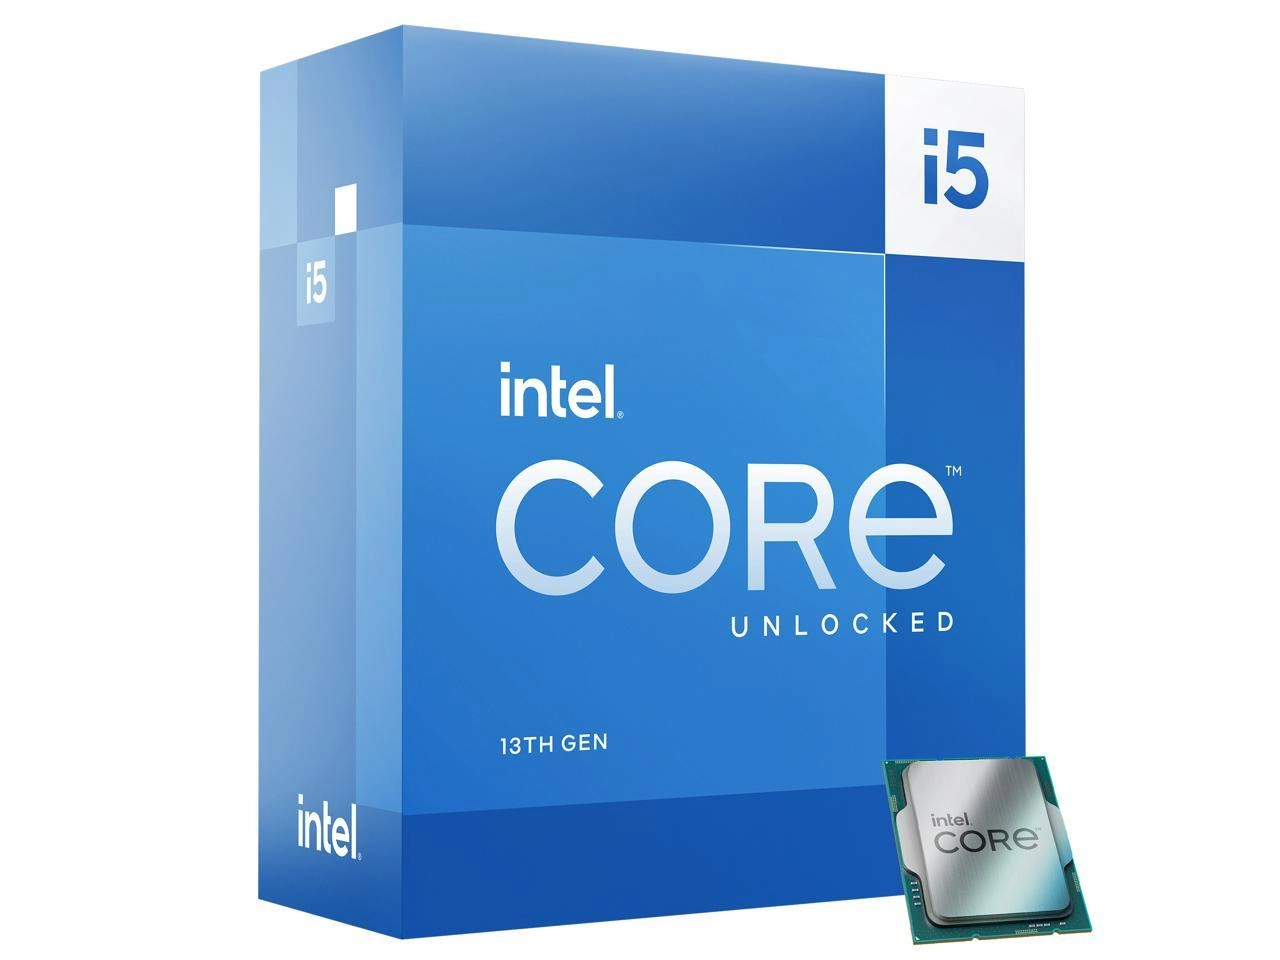 Intel® Core™ i5-13600KF, S1700, 3.5-5.1GHz, 14C(6P+8Е) / 20T, 24MB L3 + 20MB L2 Cache, No Integrated GPU, 10nm 125W, Unlocked, Retail (without cooler)